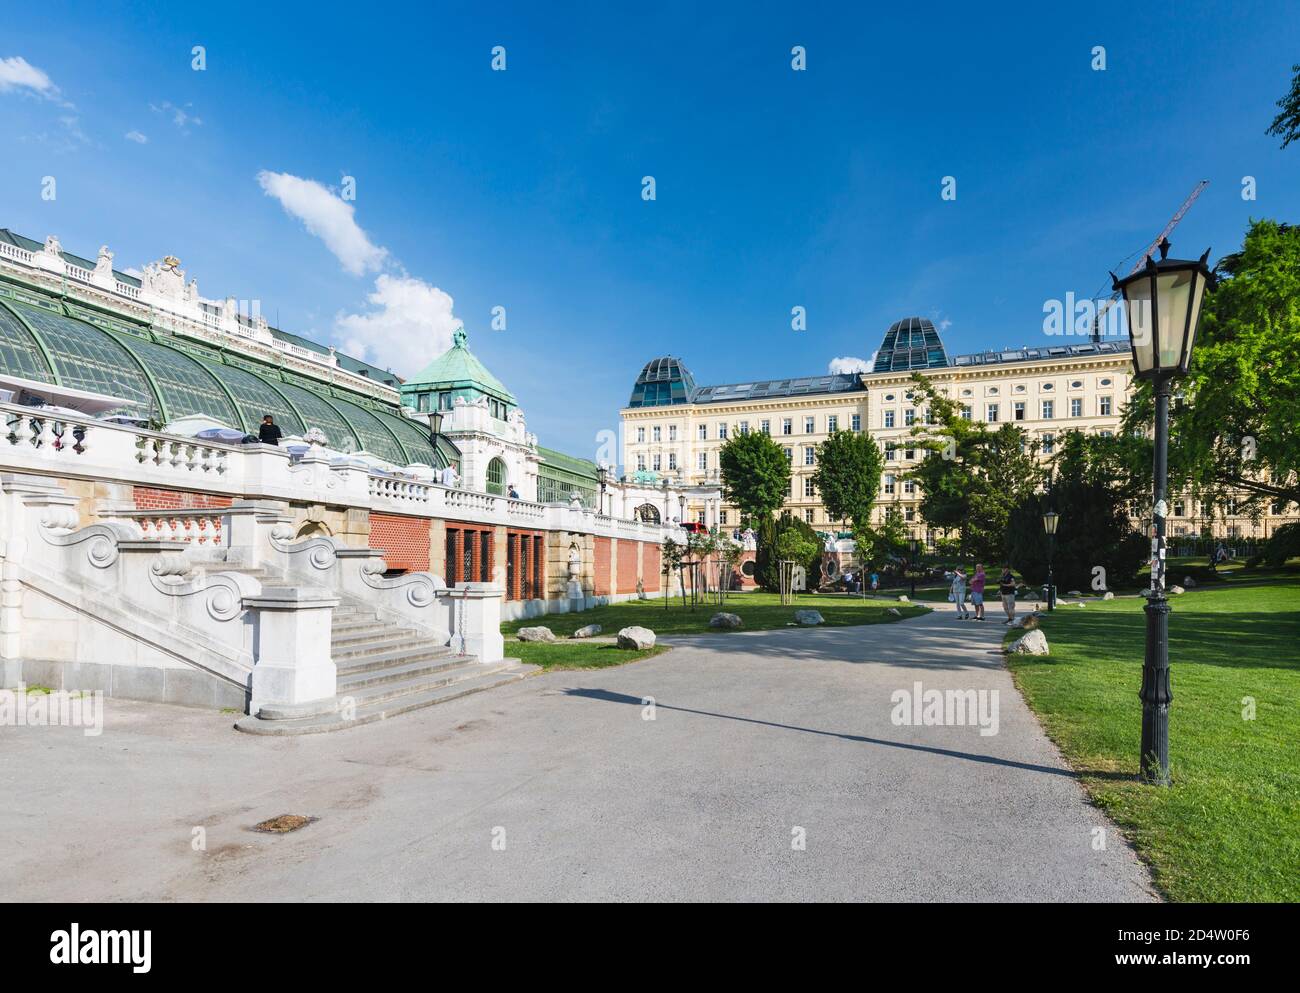 VIENNA - MAY 3: View of the Vienna Burggarten park in summer, Austria with the Palmenhaus to the left on May 3, 2018 Stock Photo